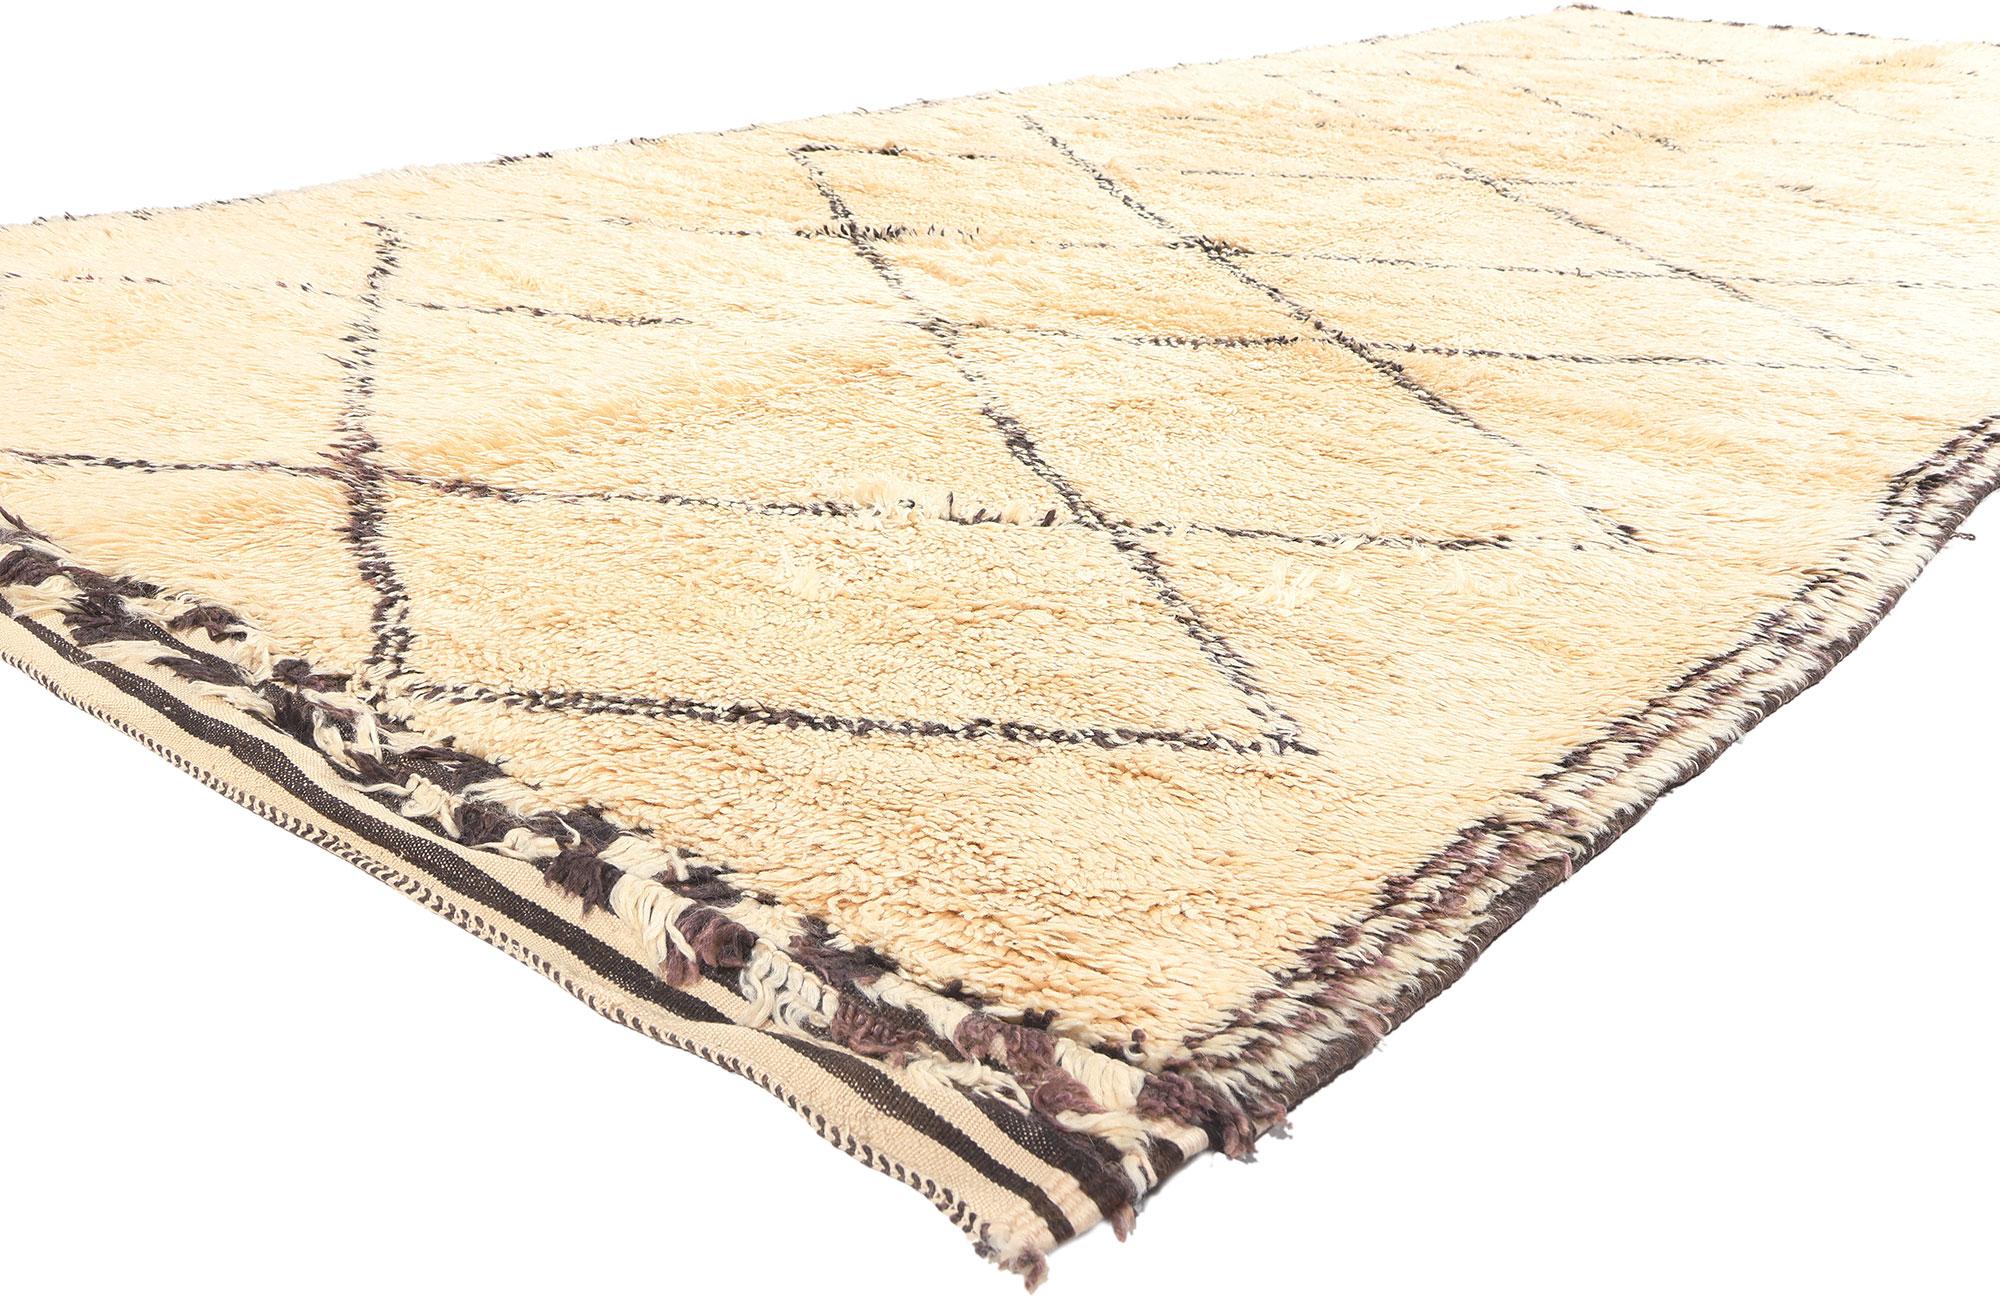 20346 Vintage Beni Ourain Moroccan Rug, 06'04 x 14'03.

In the seamless convergence of Shibui and Midcentury Modern influences, behold this meticulously hand-knotted wool vintage Moroccan Beni Ourain rug—a sublime synthesis of simplicity, enduring